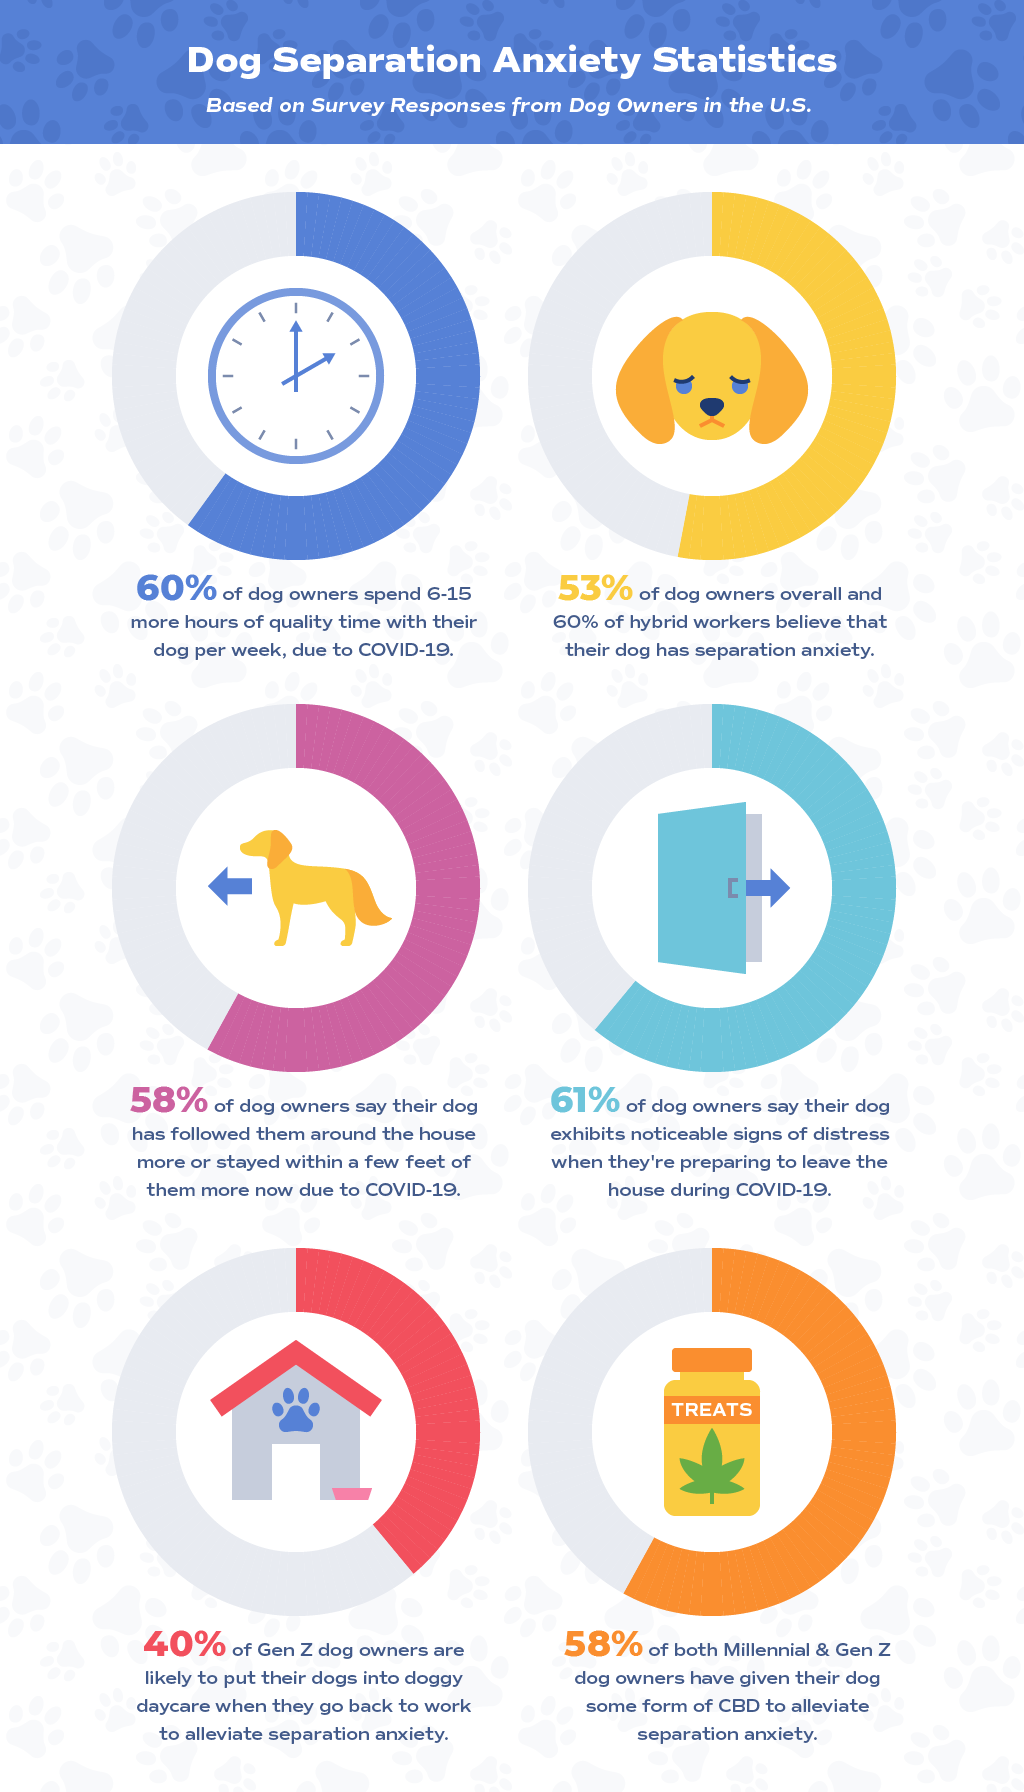 Infographic on dog separation anxiety statistics from US dog owners